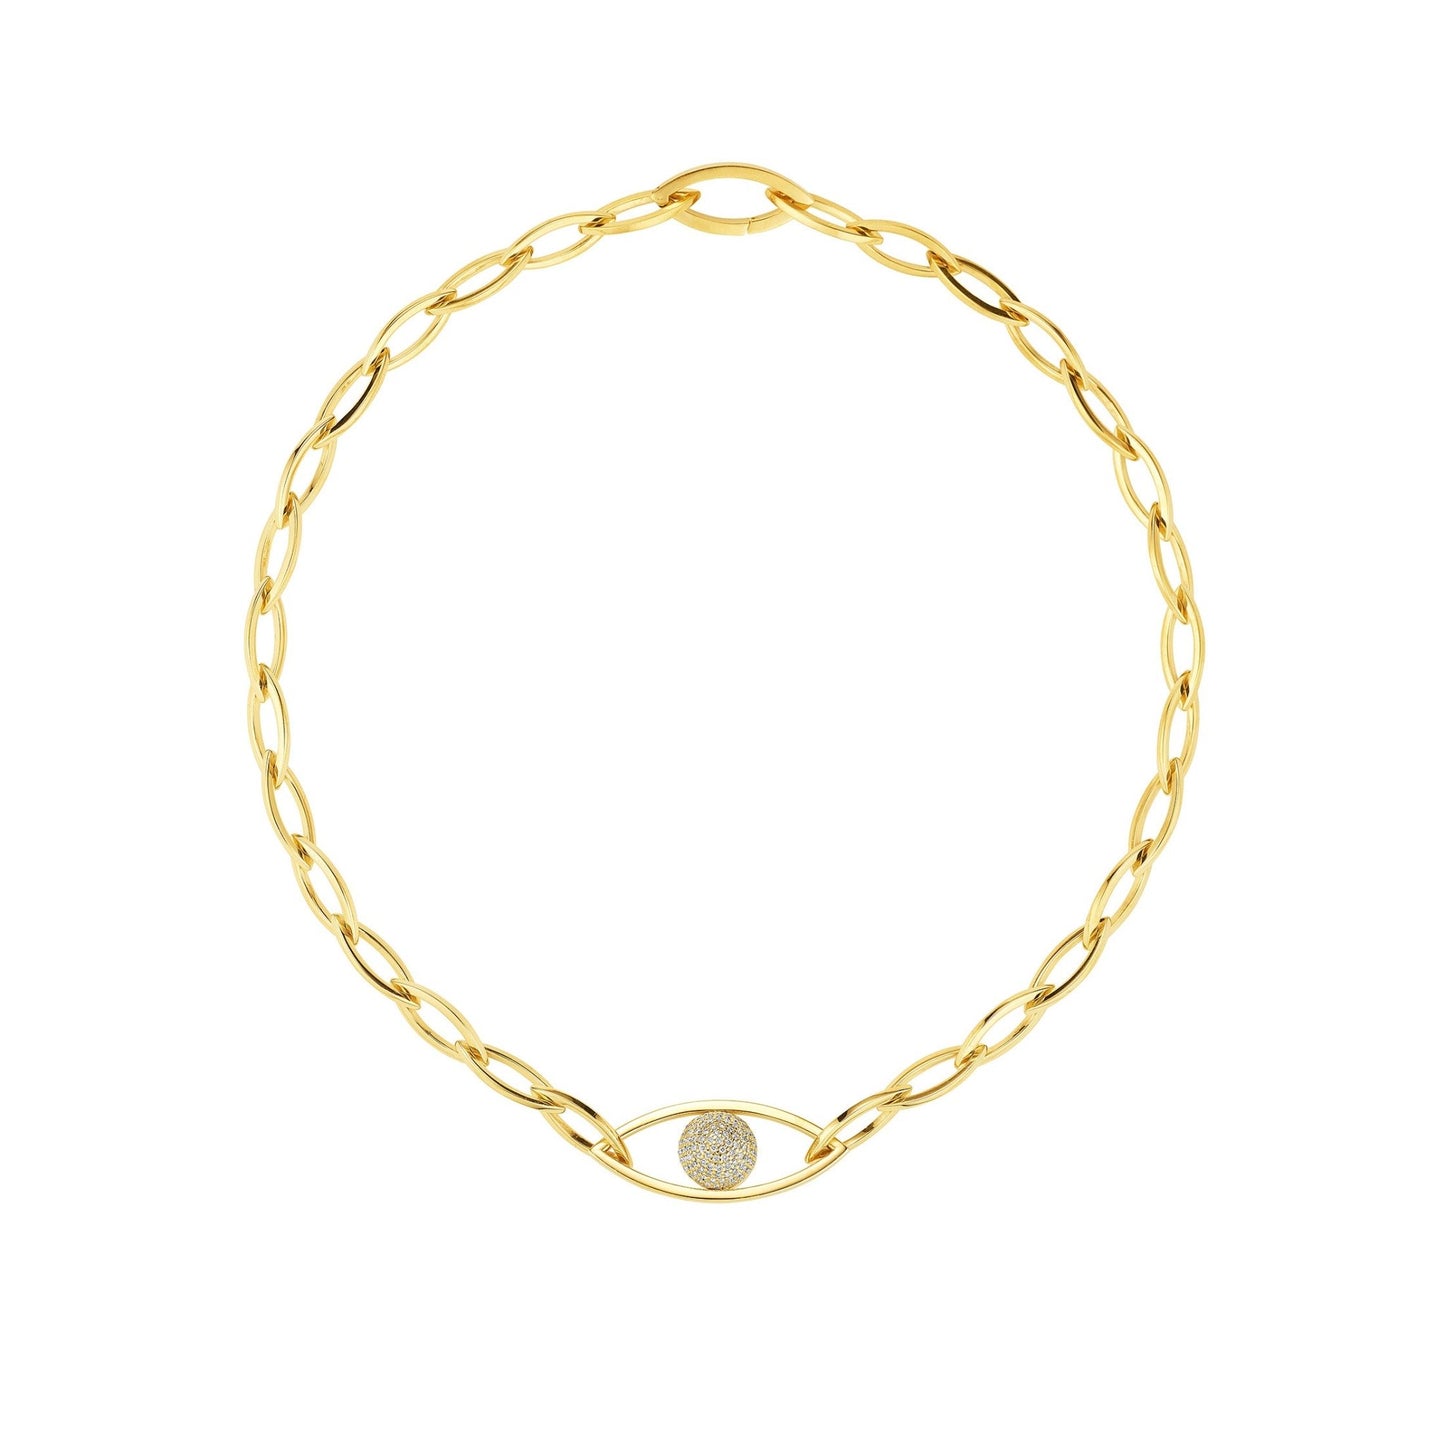 Yellow Gold Reflections Choker with White Pave Diamonds - CADAR